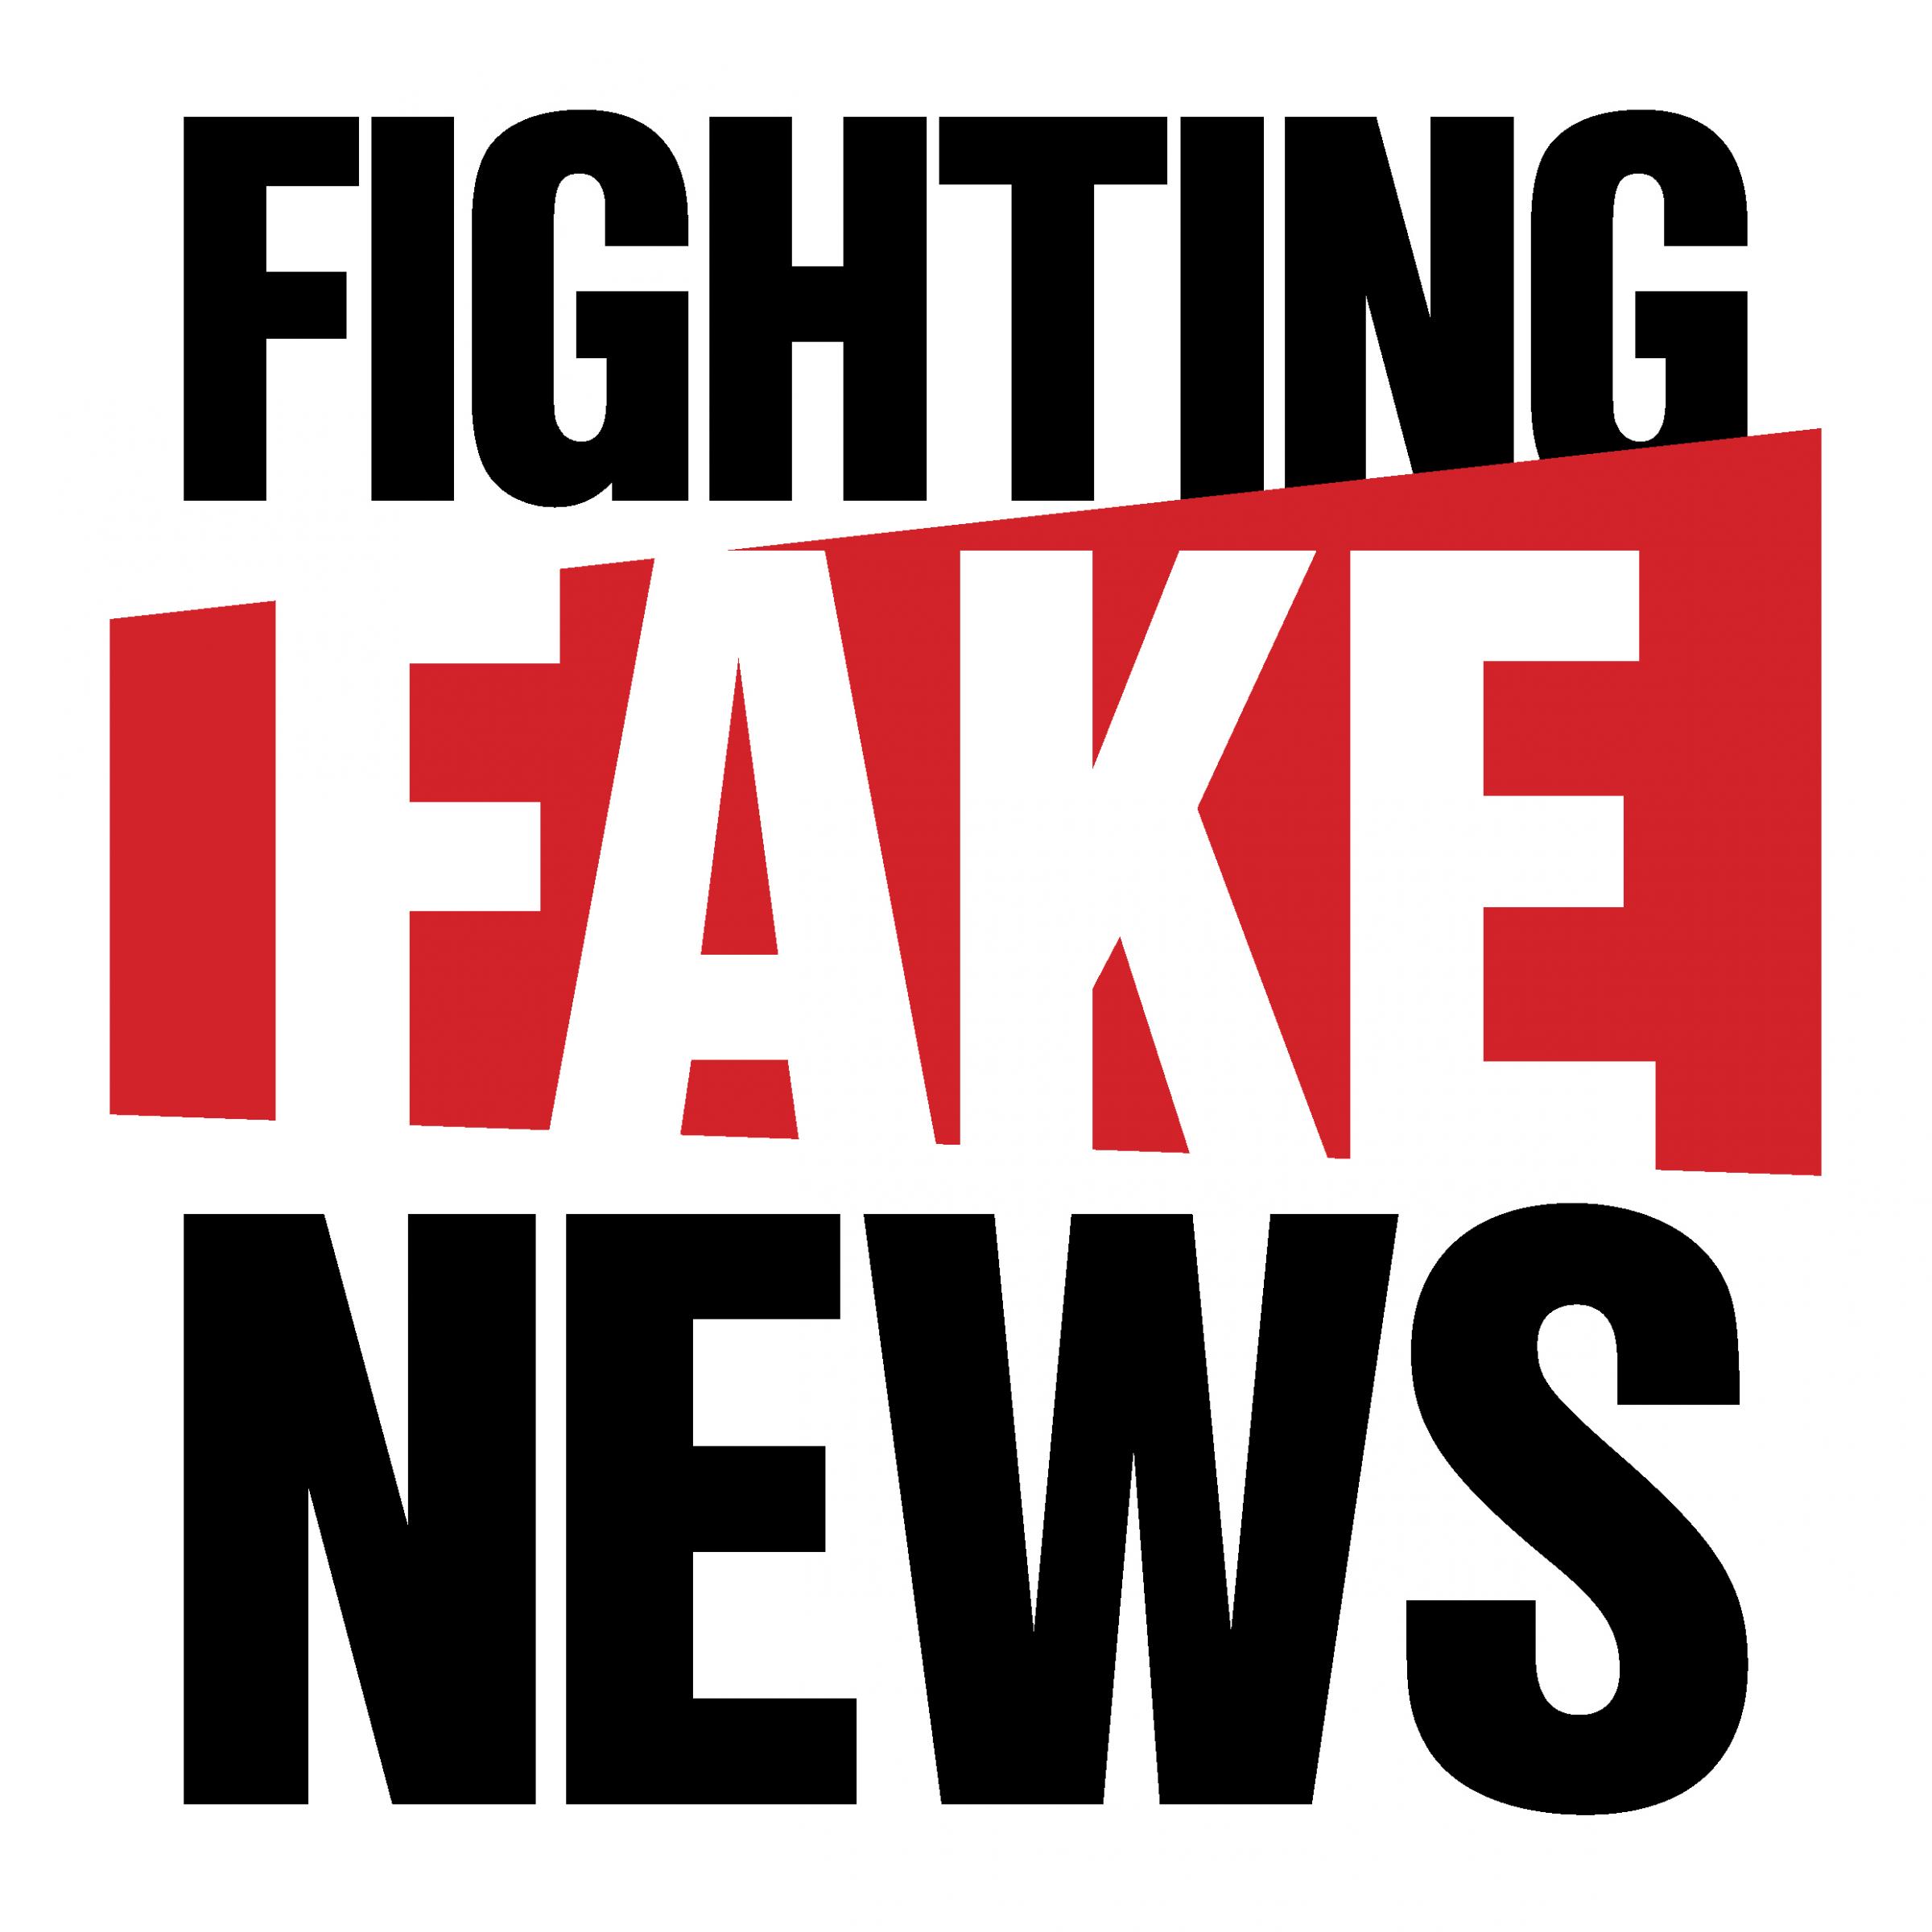 Local papers unite to join fight against fake news